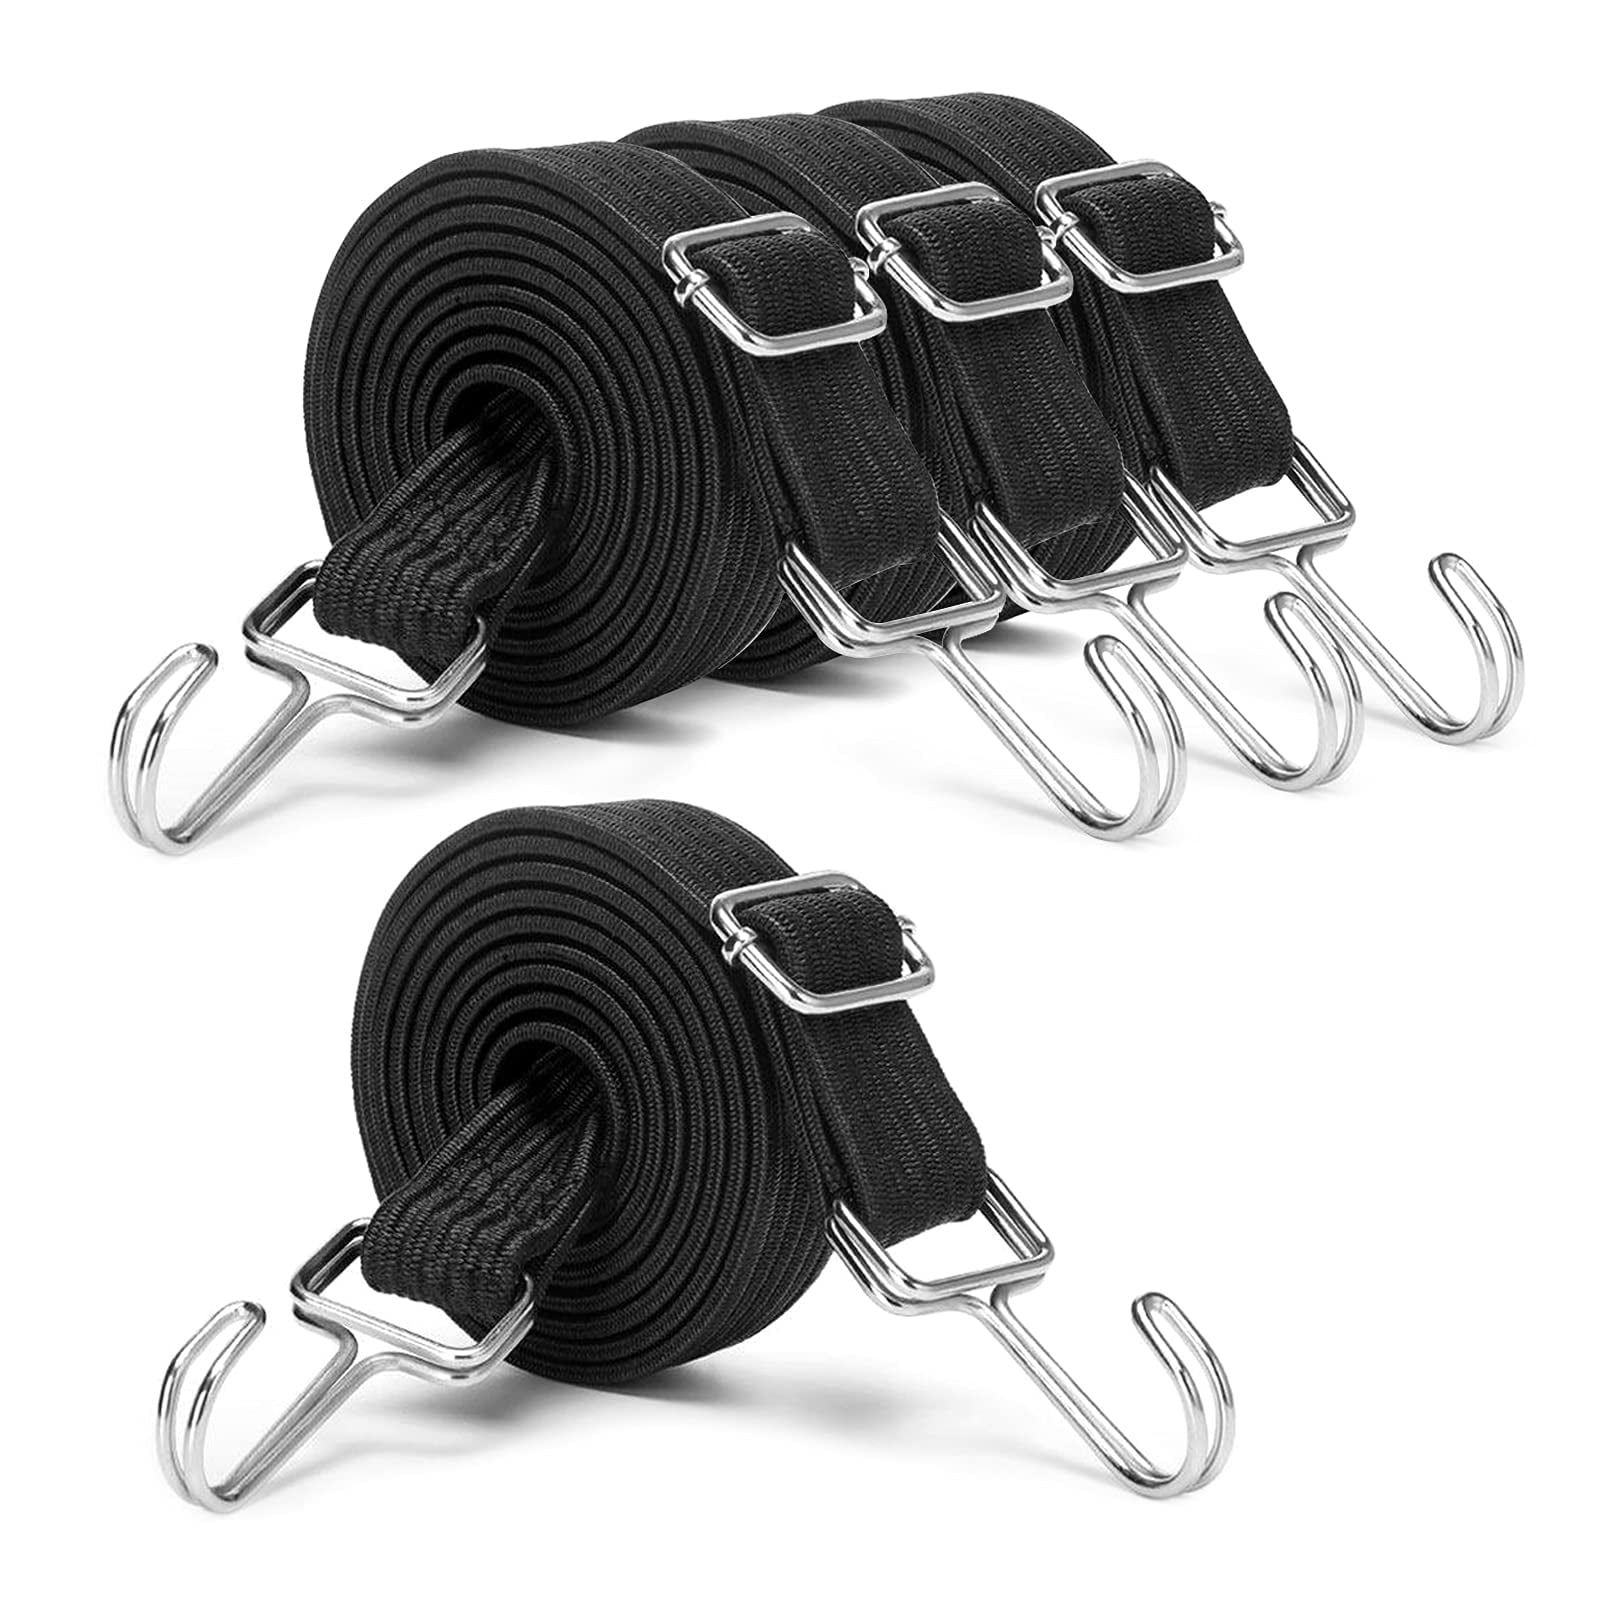 Yuxh 40 Bungee Cord with Carabiner Hooks Black 3Pcs 